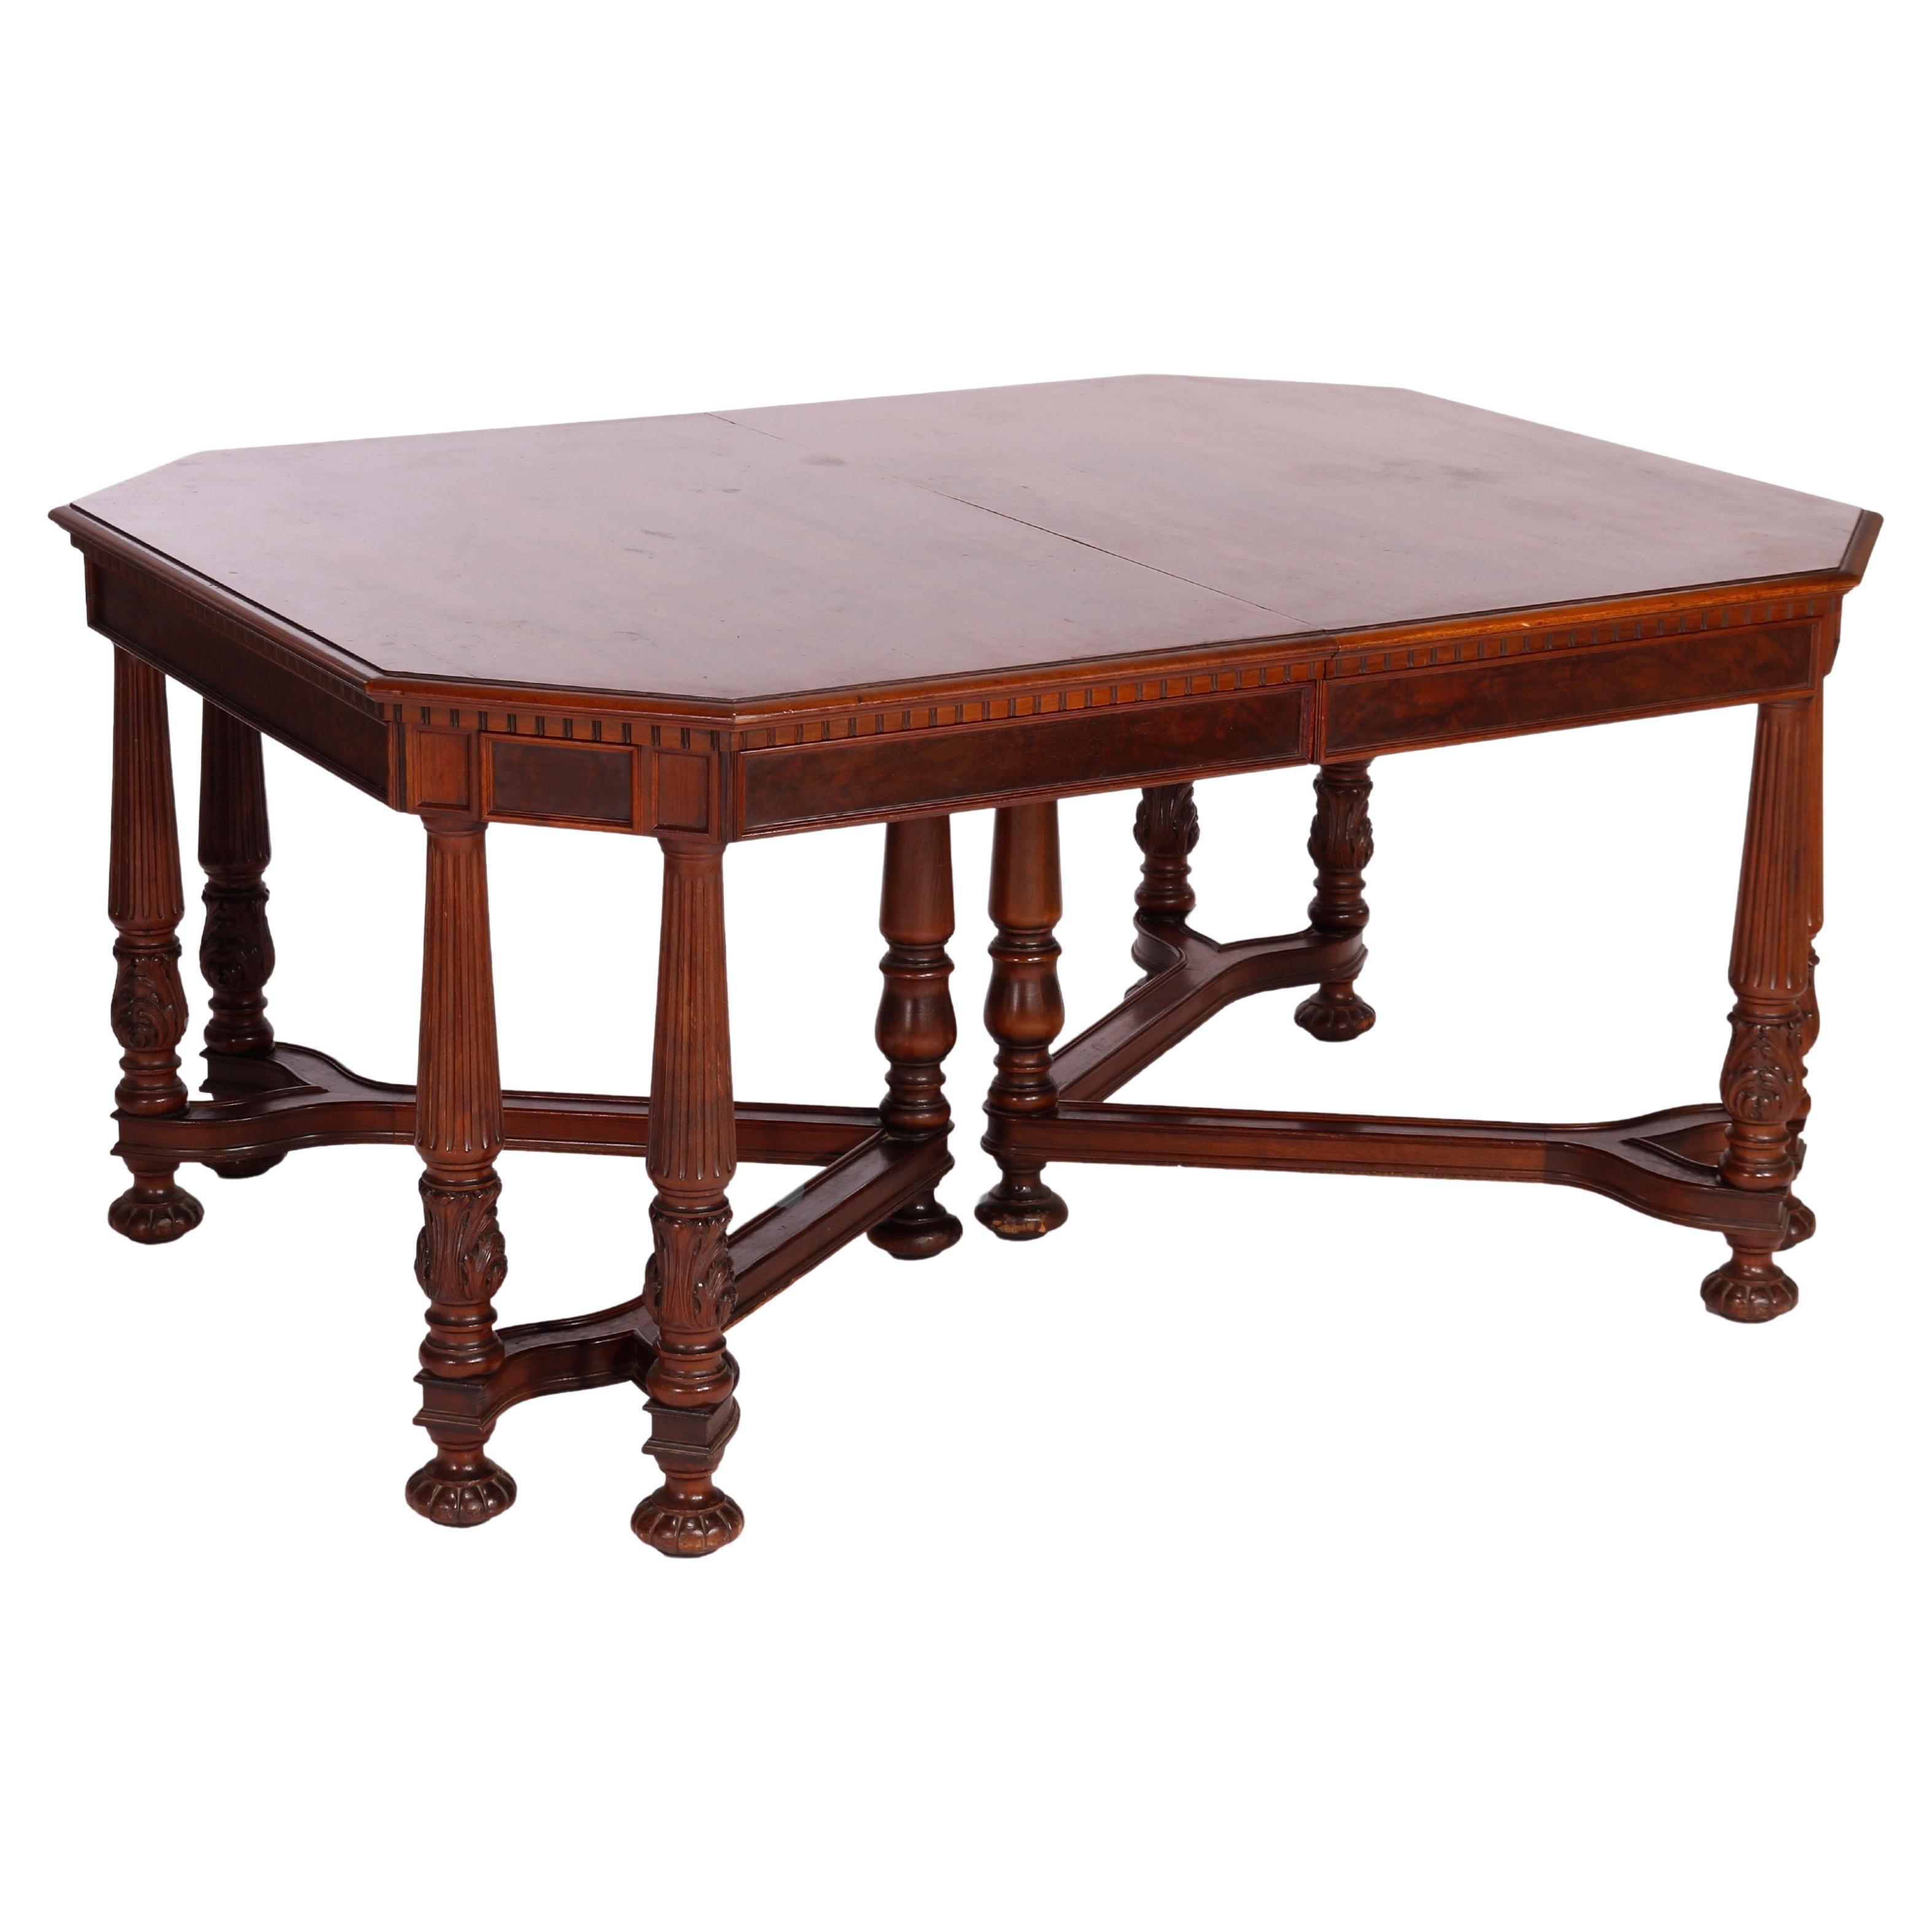 Antique Neoclassical Carved Walnut & Burl Dining Table Circa 1930